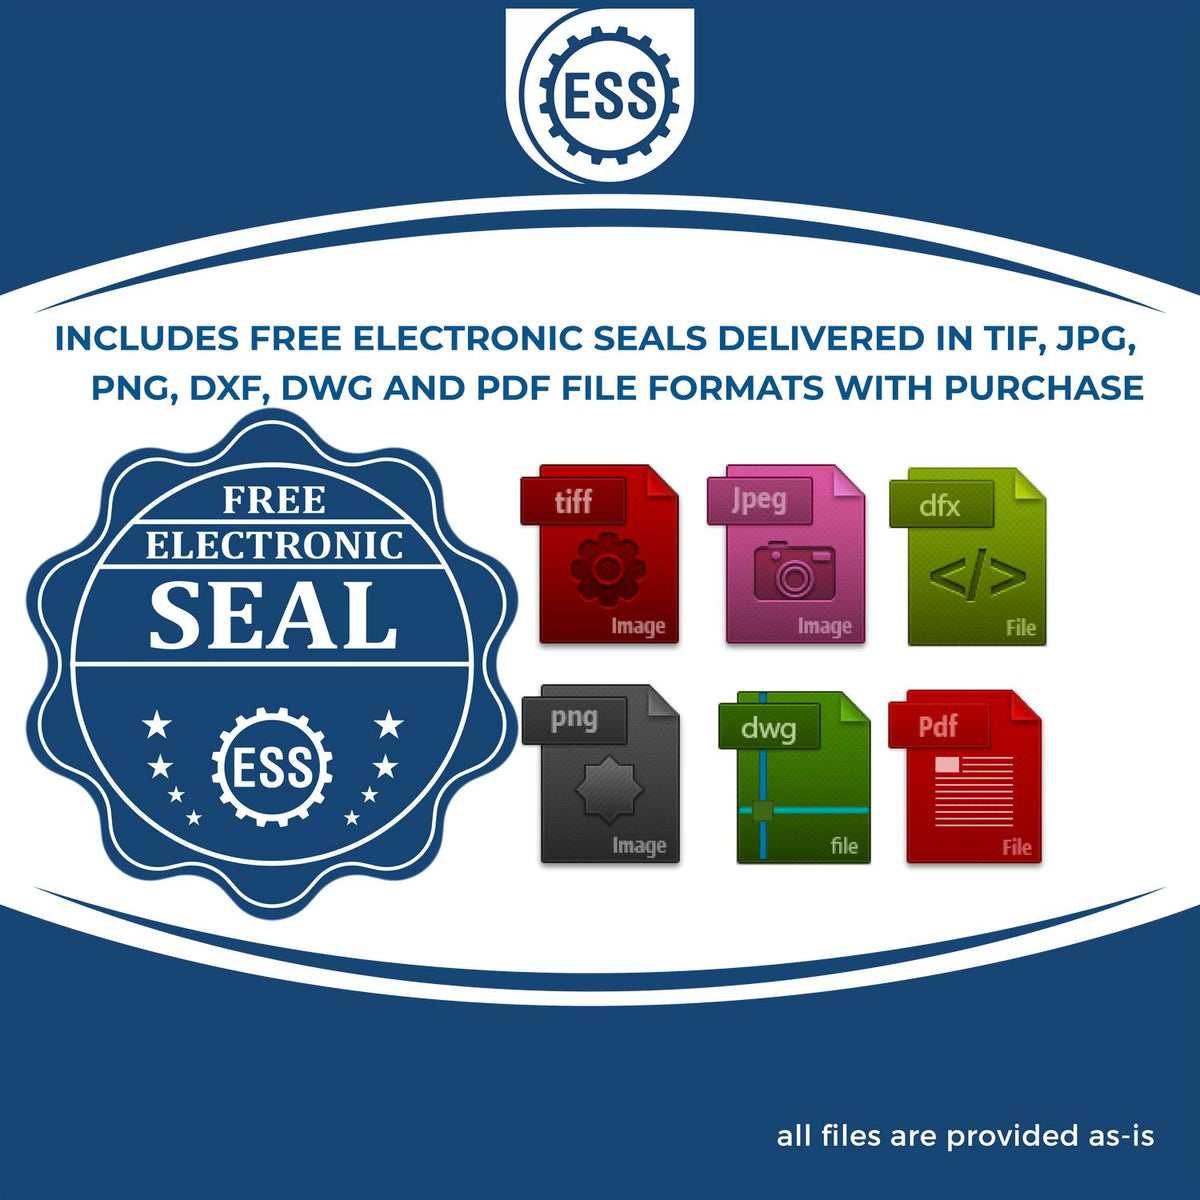 An infographic for the free electronic seal for the Self-Inking Pennsylvania Geologist Stamp illustrating the different file type icons such as DXF, DWG, TIF, JPG and PNG.